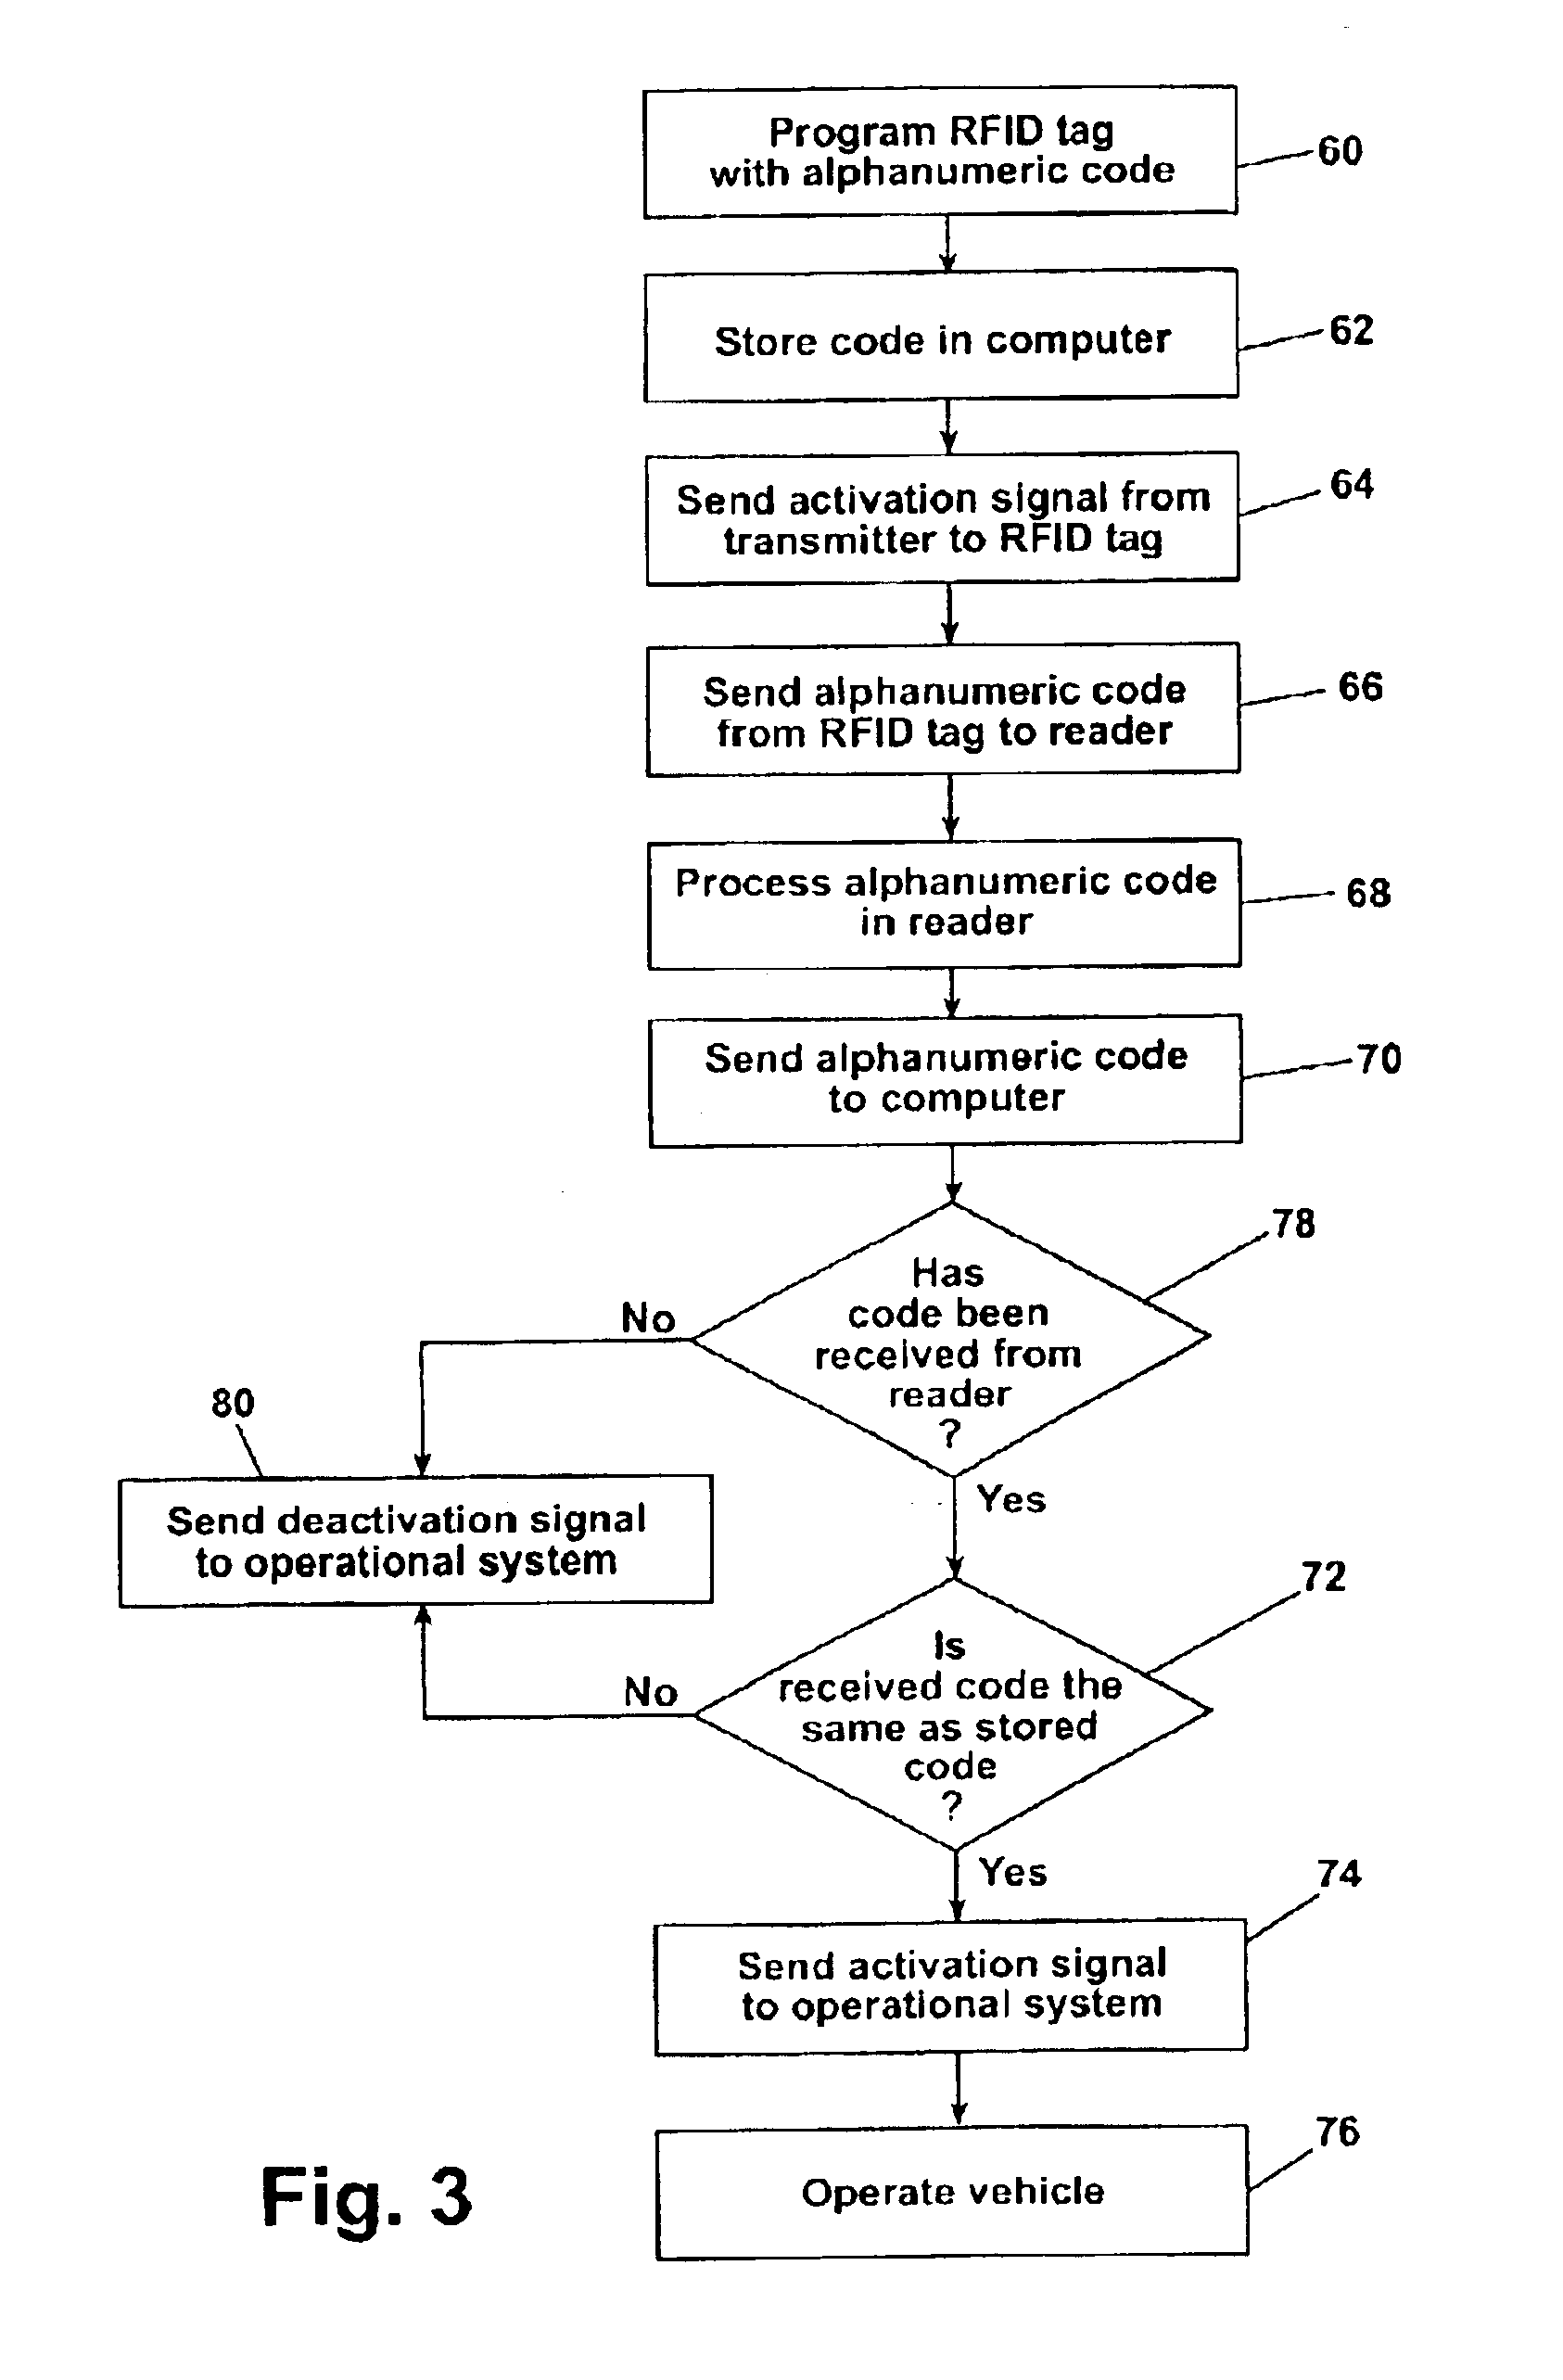 Vehicle control system with radio frequency identification tag